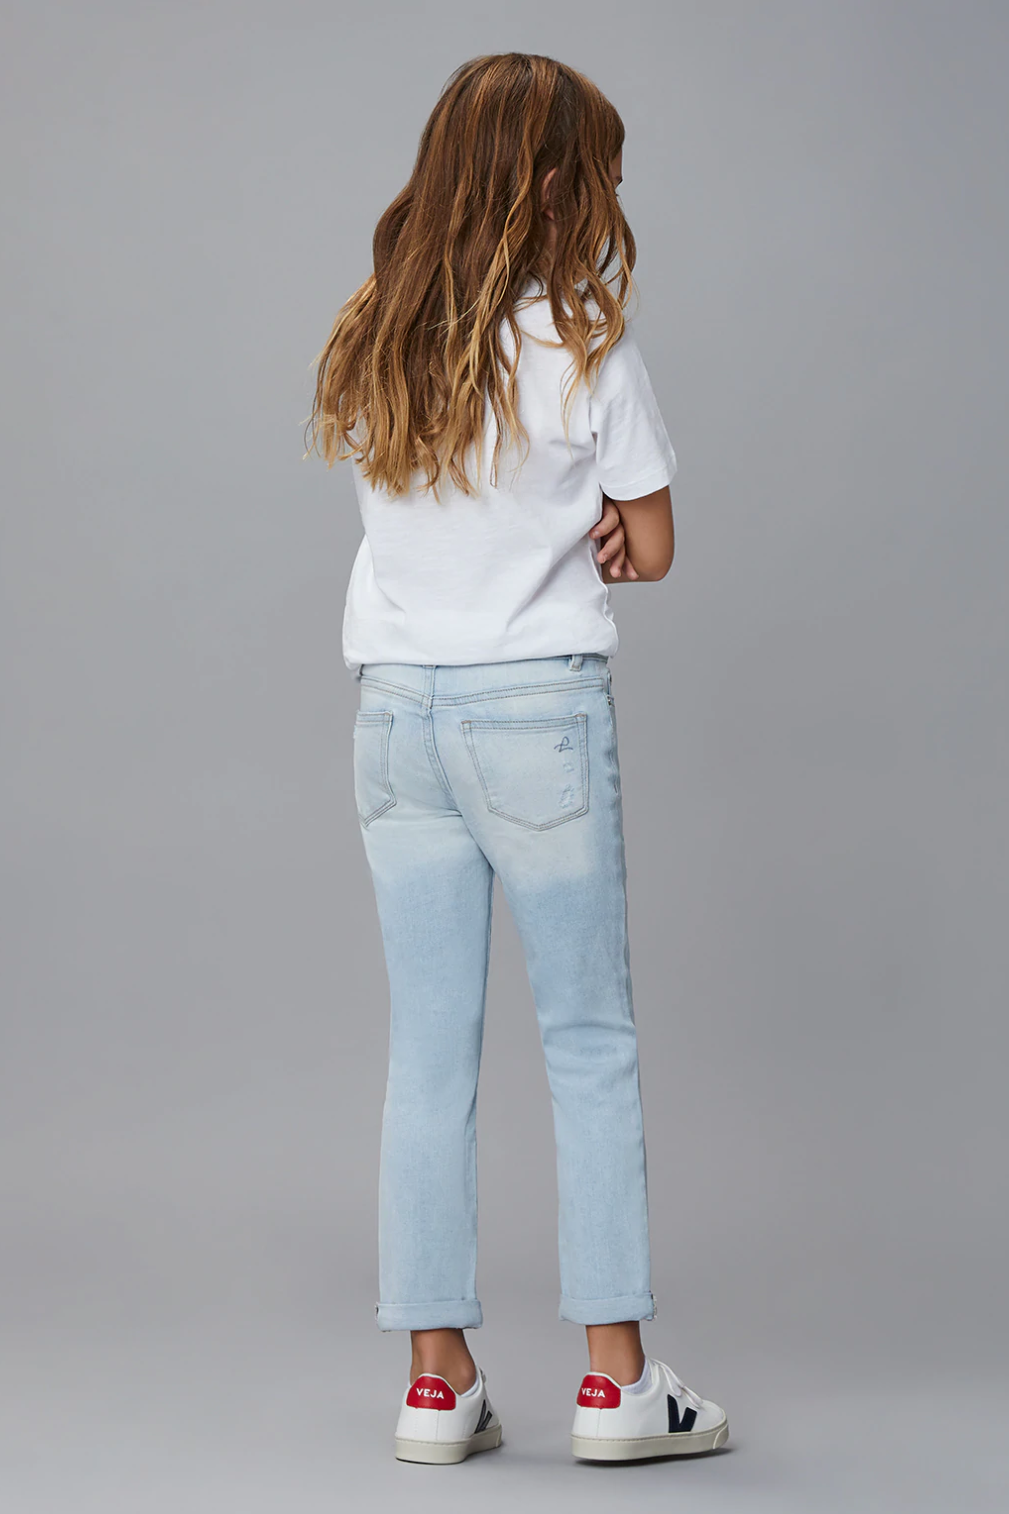 The Harper Boyfriend Straight Jeans in Ross Distressed by DL1961